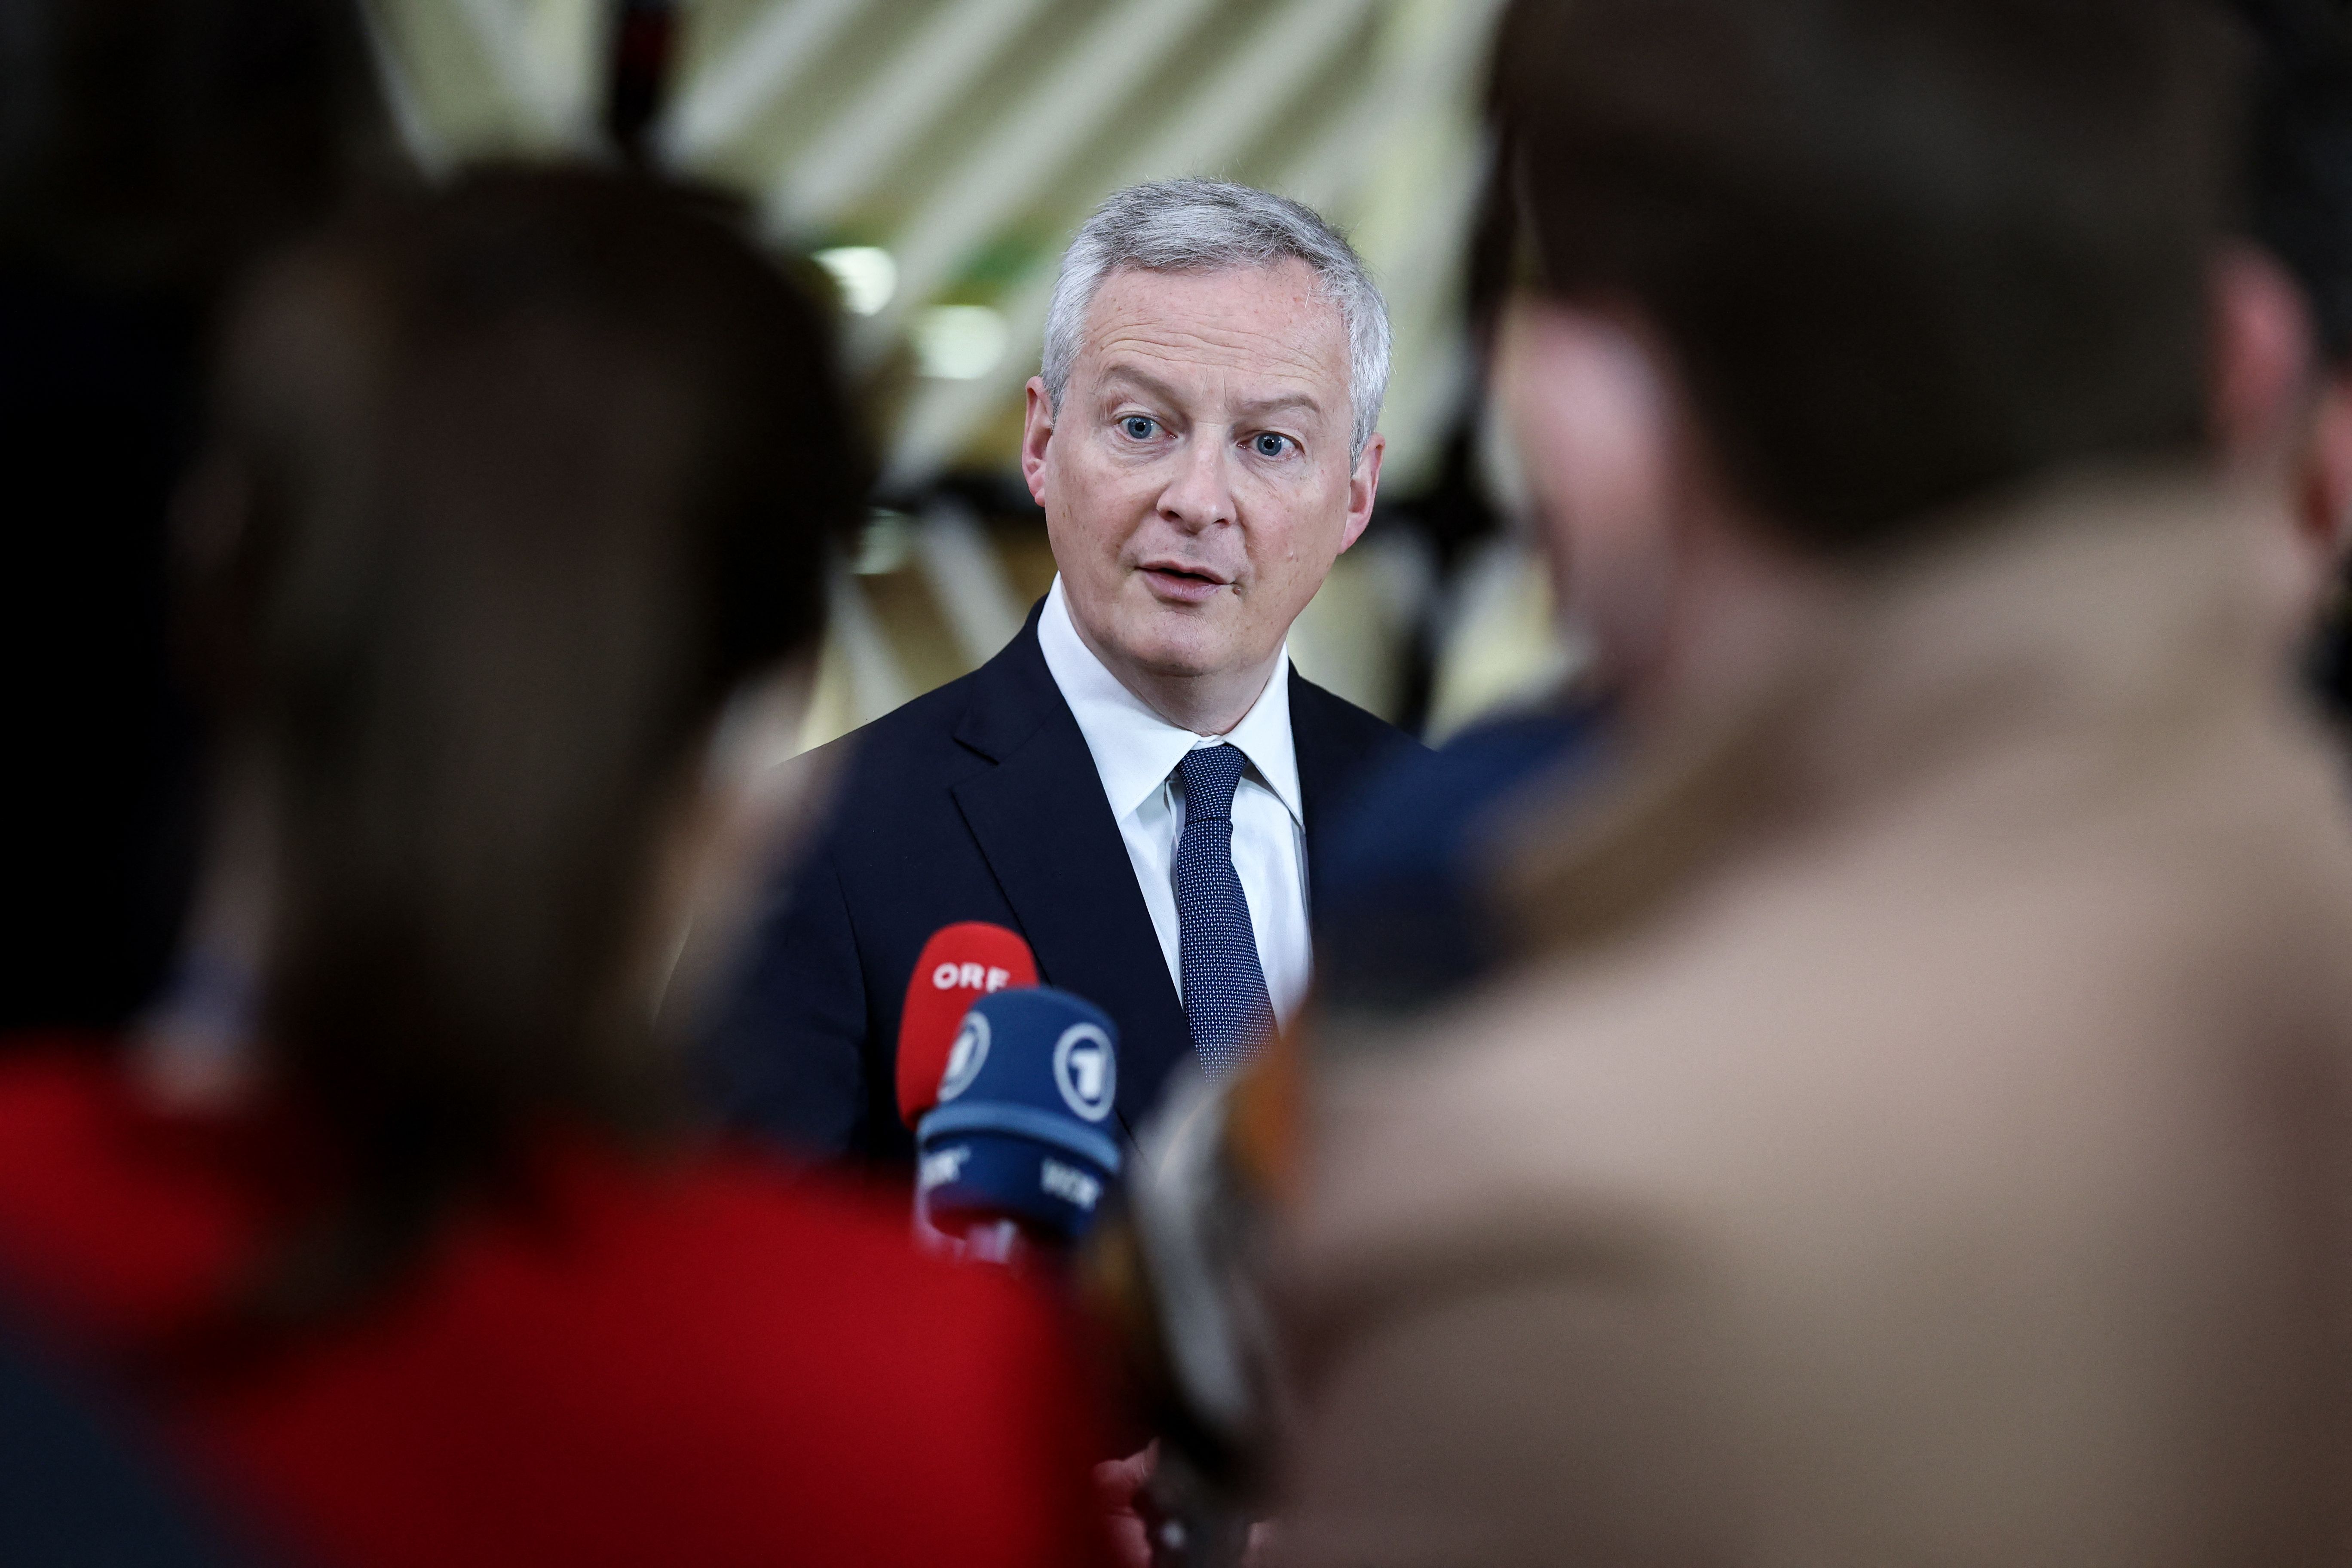 French Finance Minister Bruno Le Maire answers journalists' questions at the EU headquarters in Brussels, Belgium, on March 15.